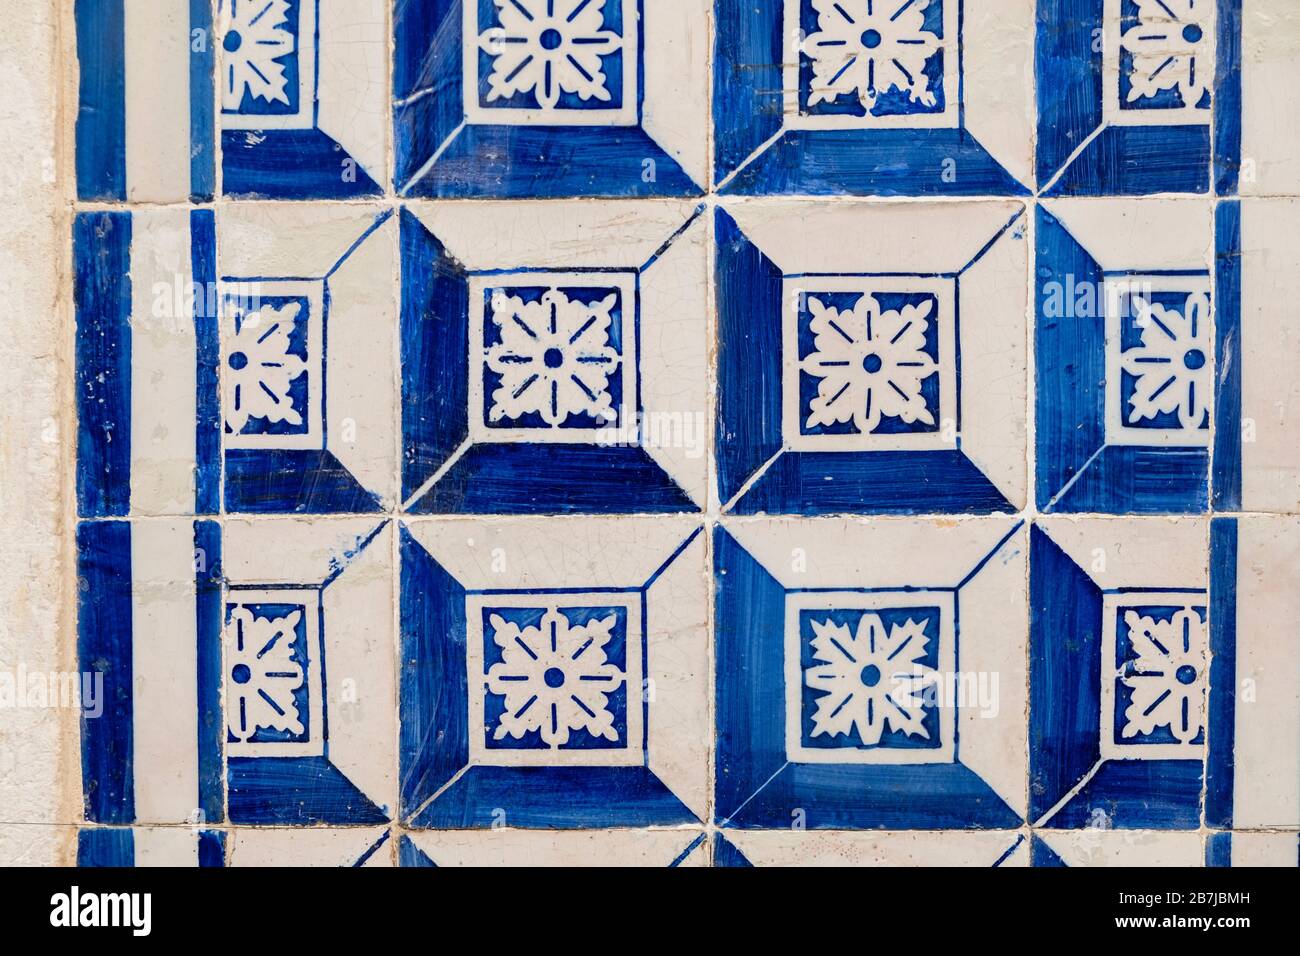 Closeup detail of traditional Portuguese tiles Stock Photo